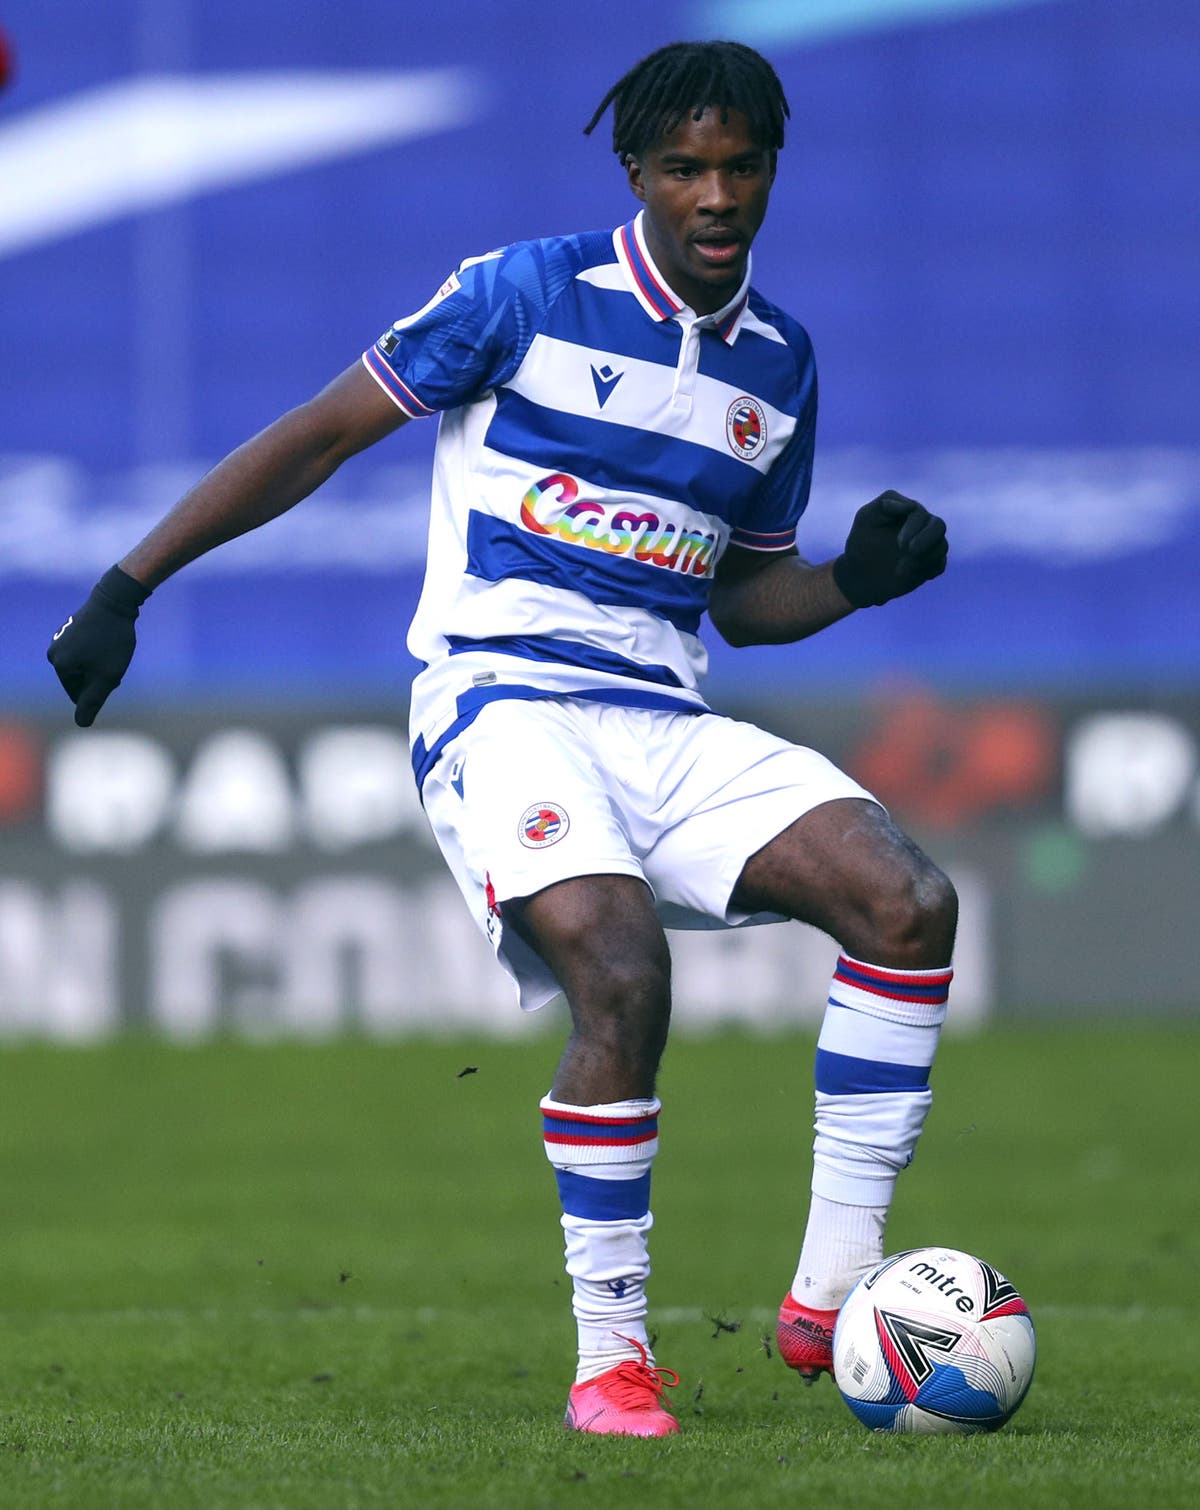 Omar Richards to join Bayern Munich after Reading contract expires